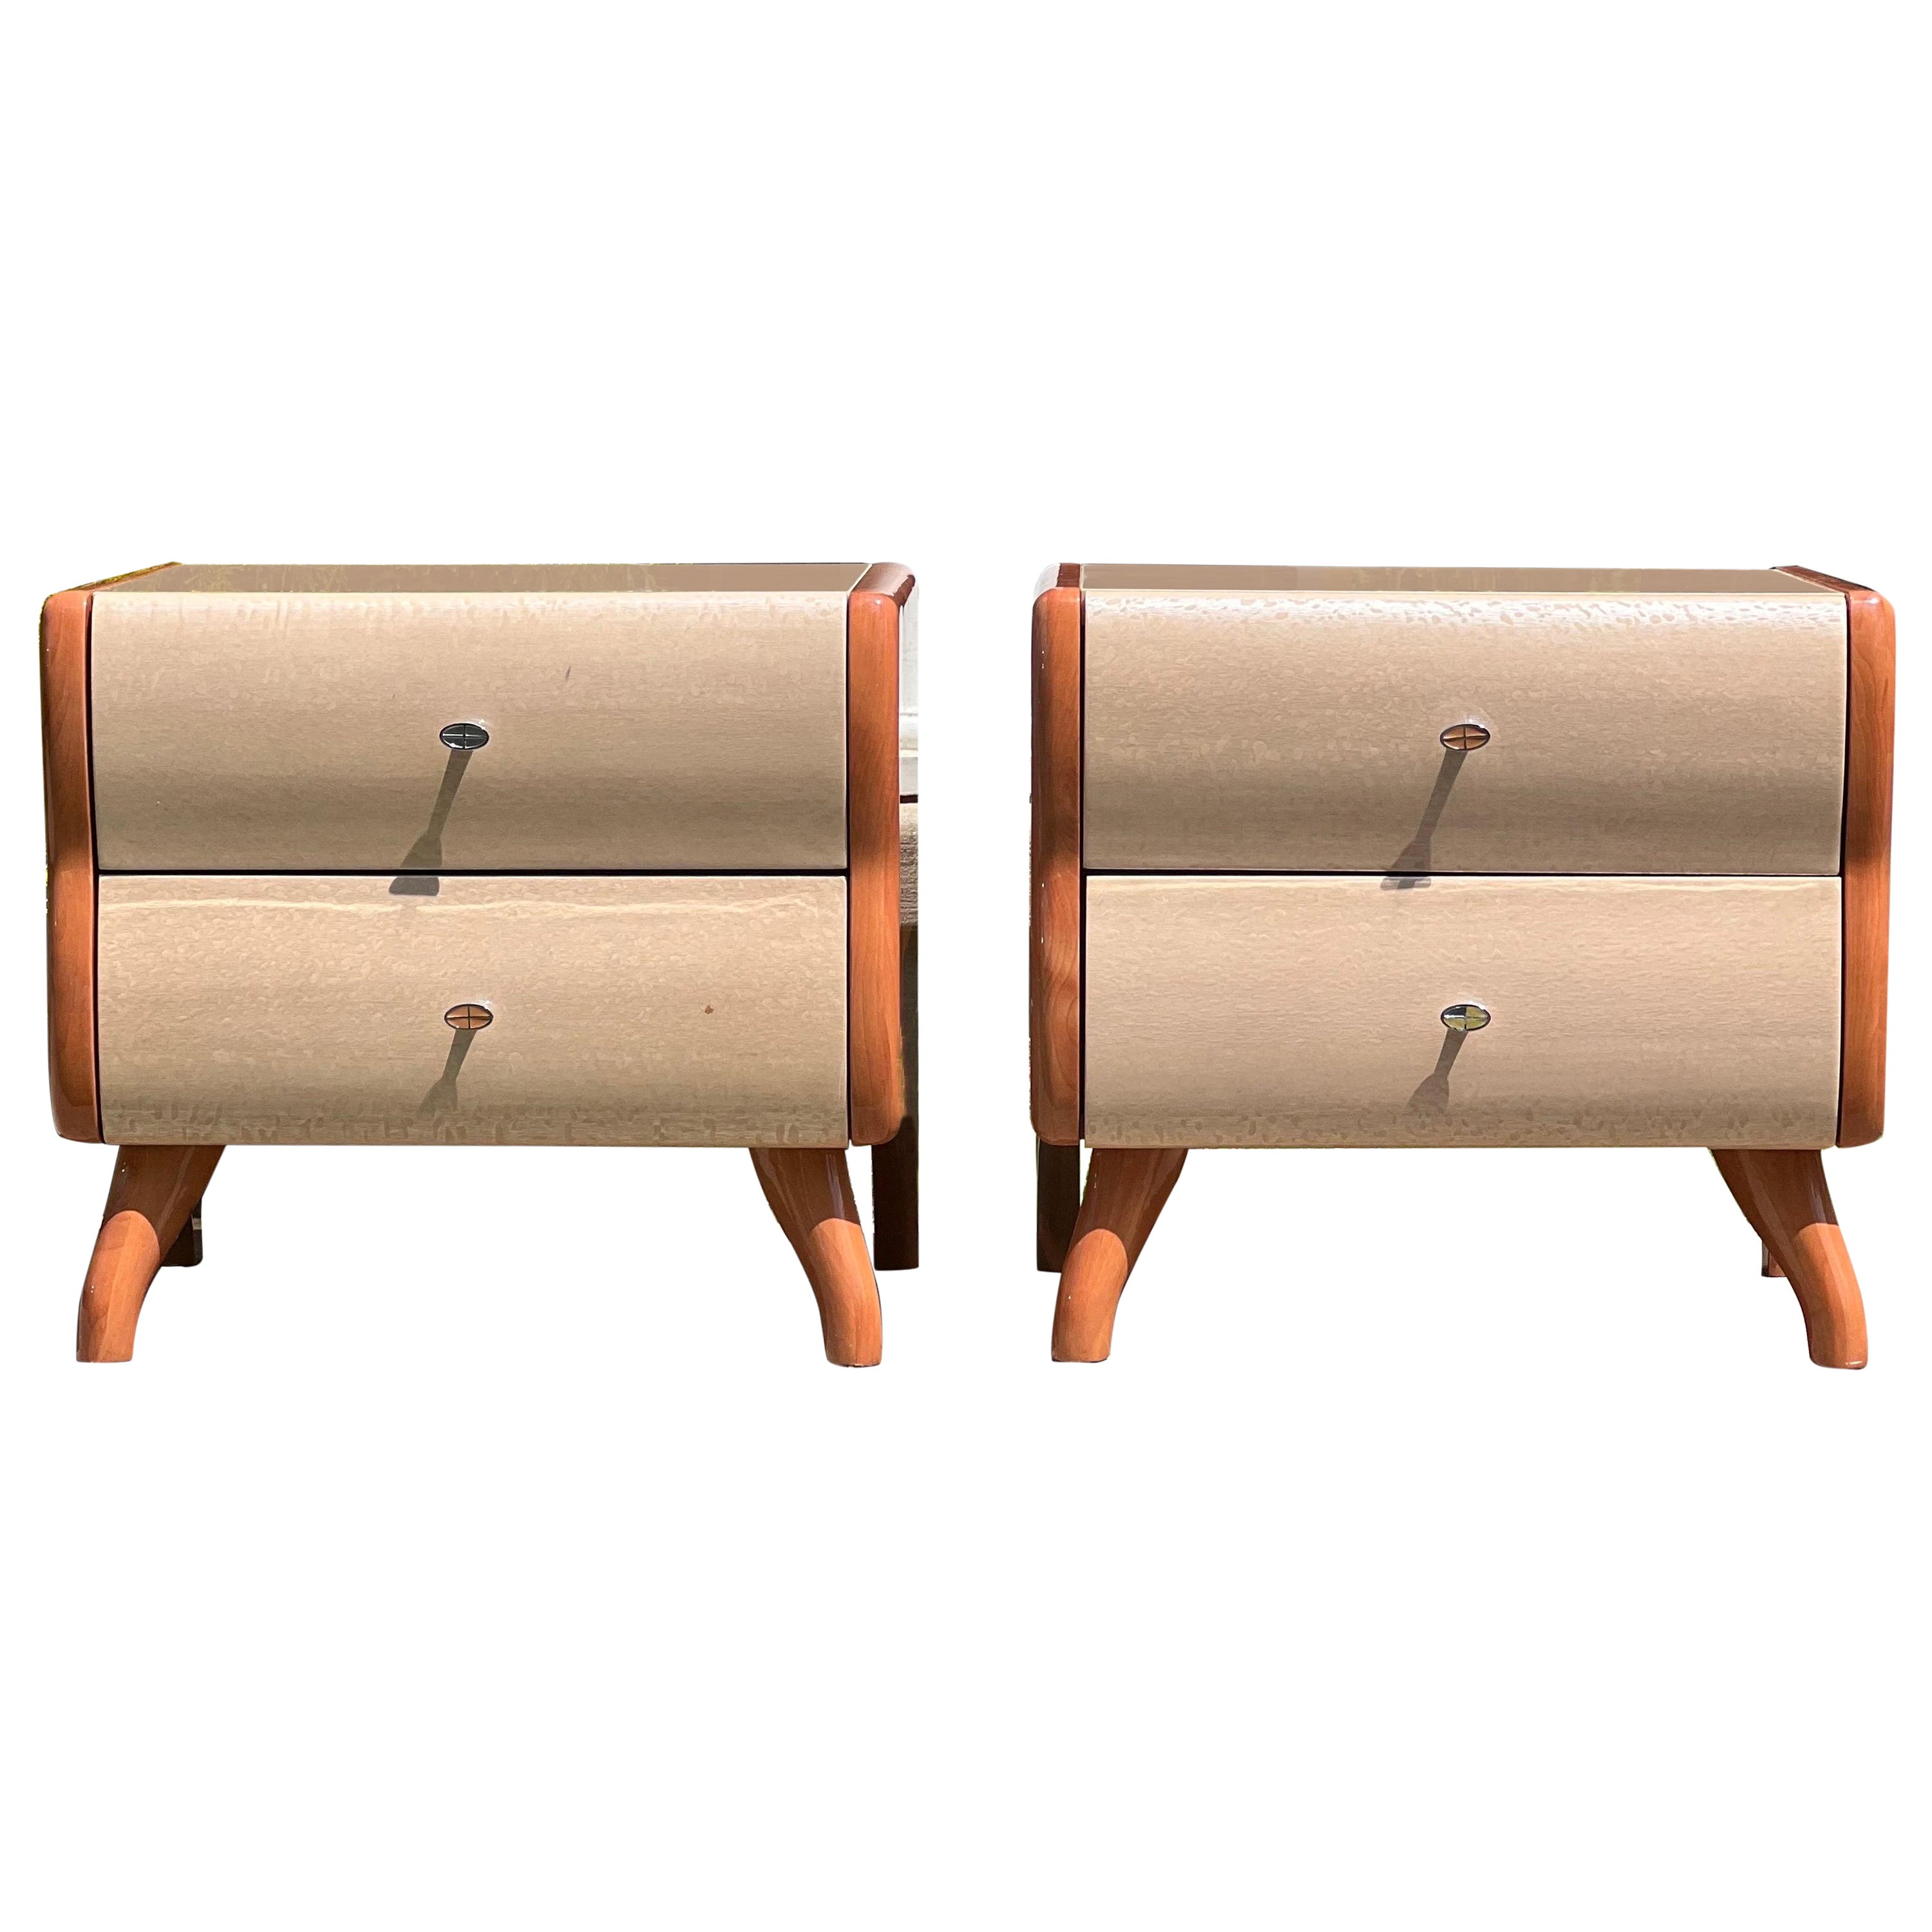 Vintage Italian Lacquered Two-Tone Nightstands, Pair